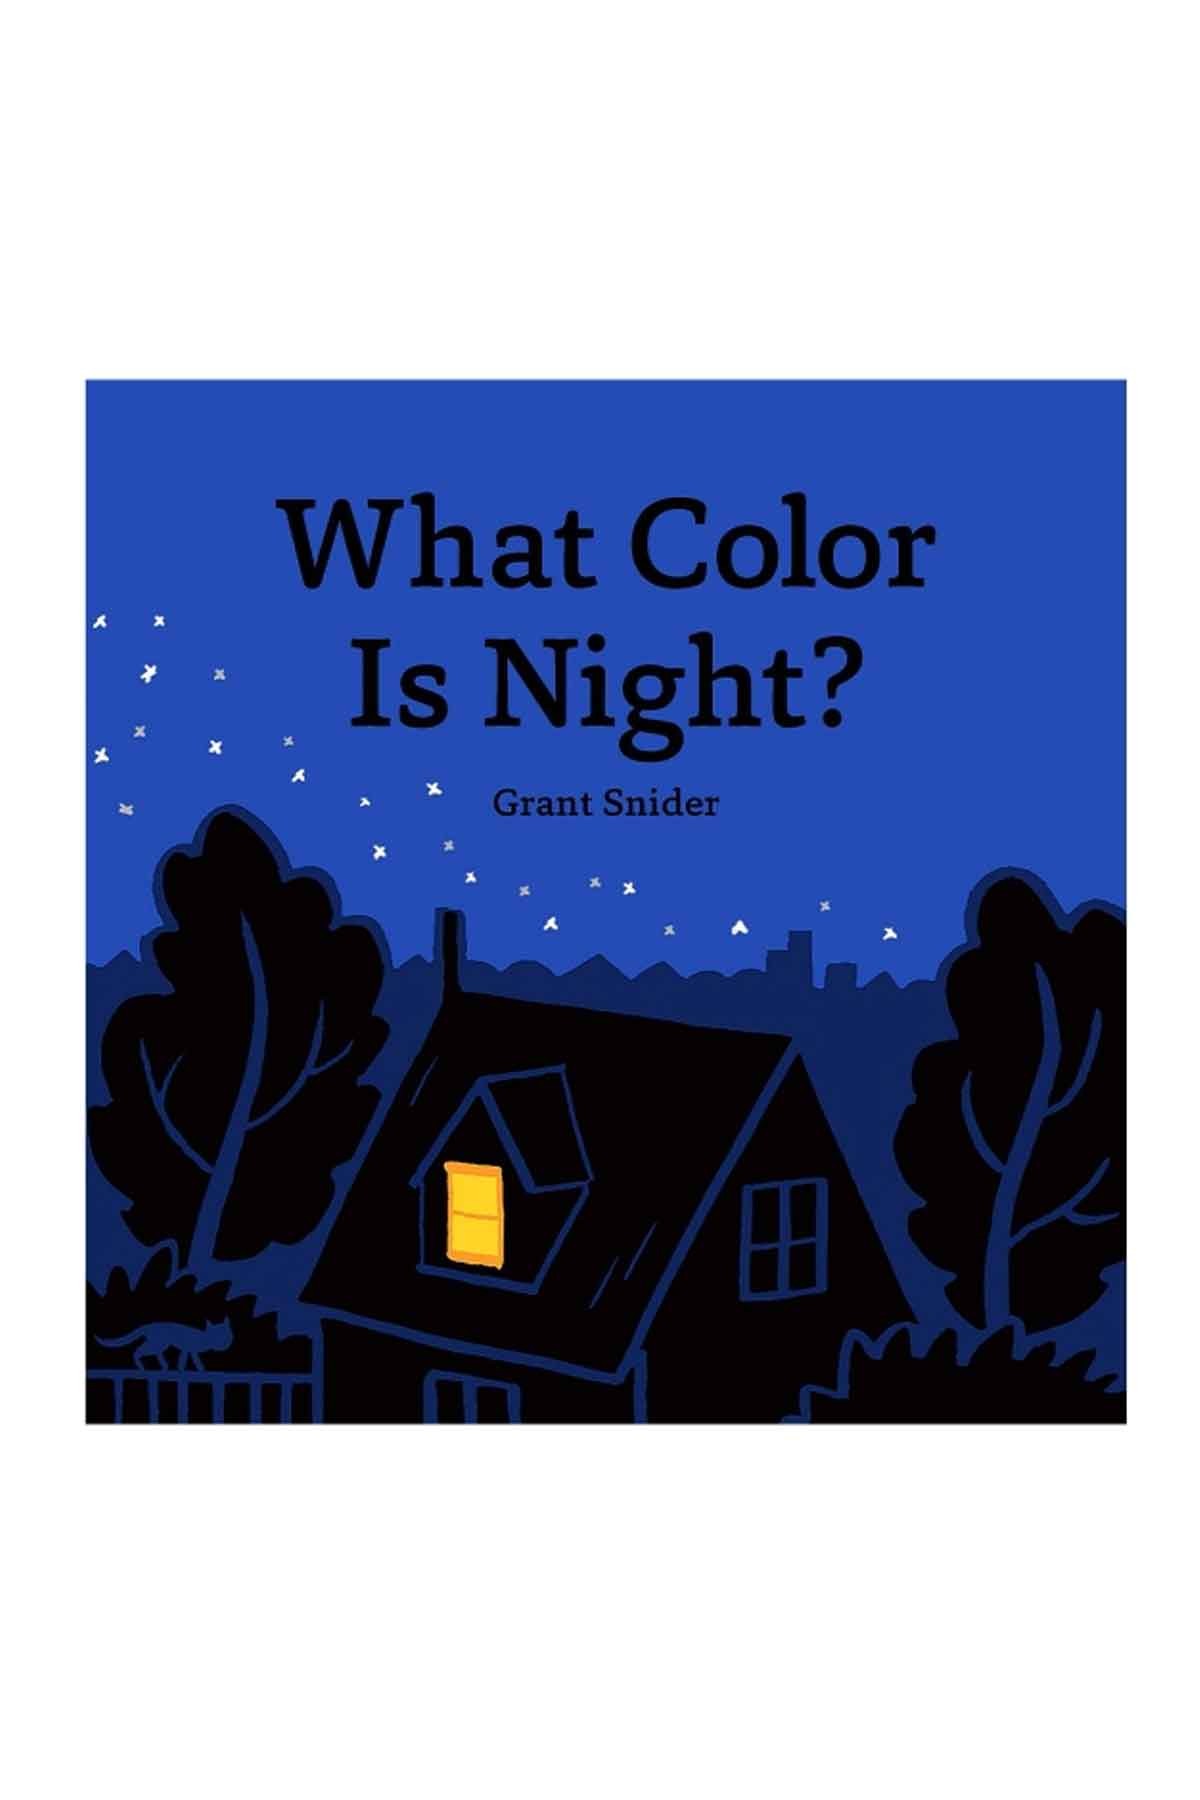 Chronicle - What Color Is Night?